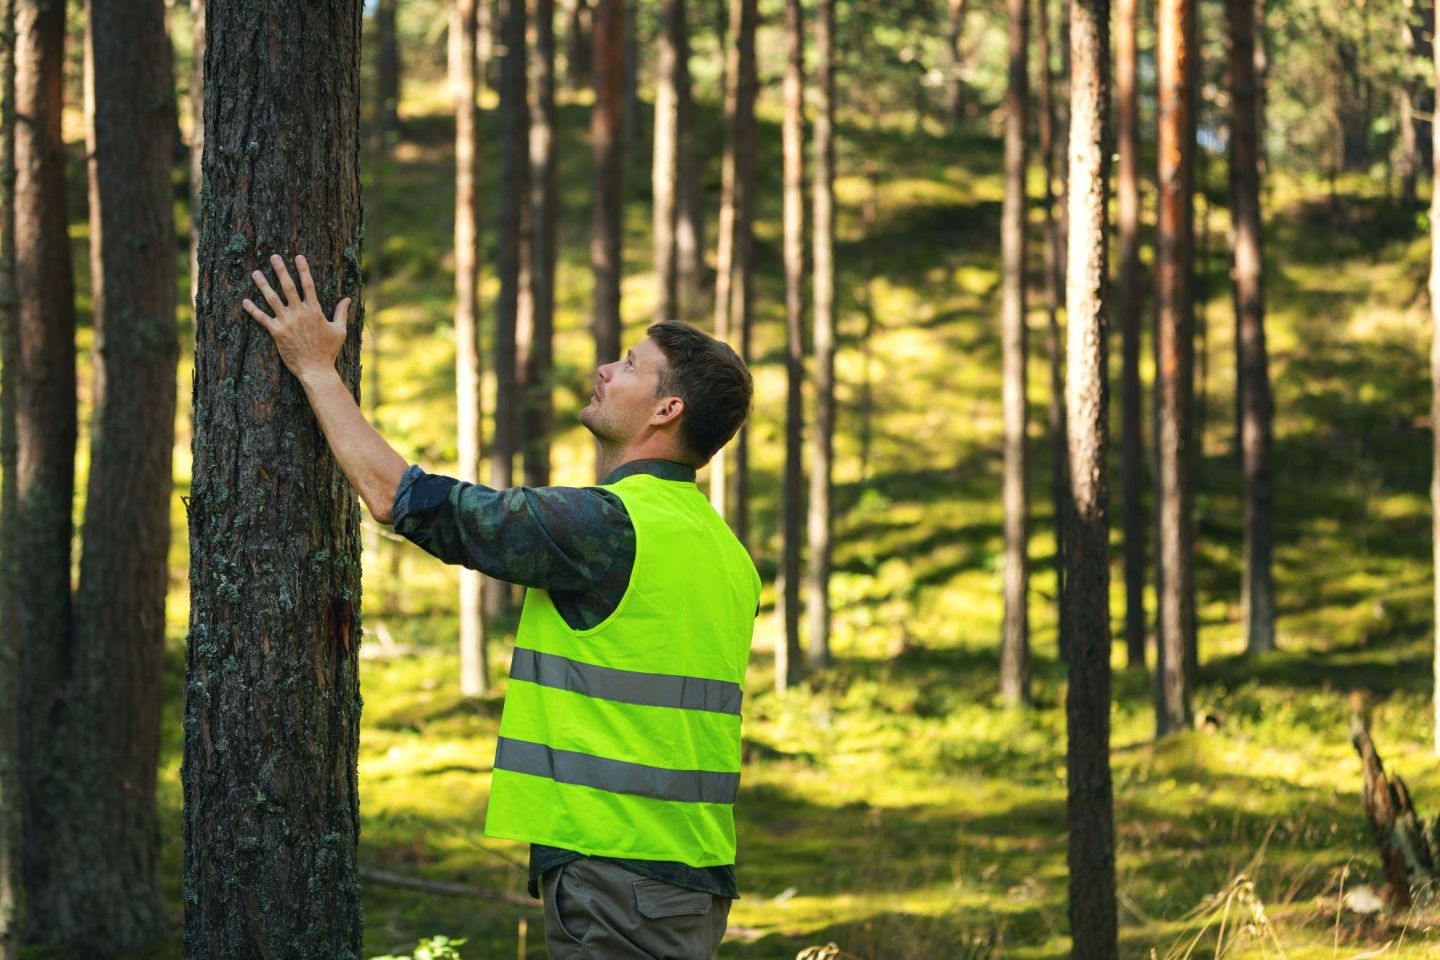 BSc (Hons) in Land Management in Forestry